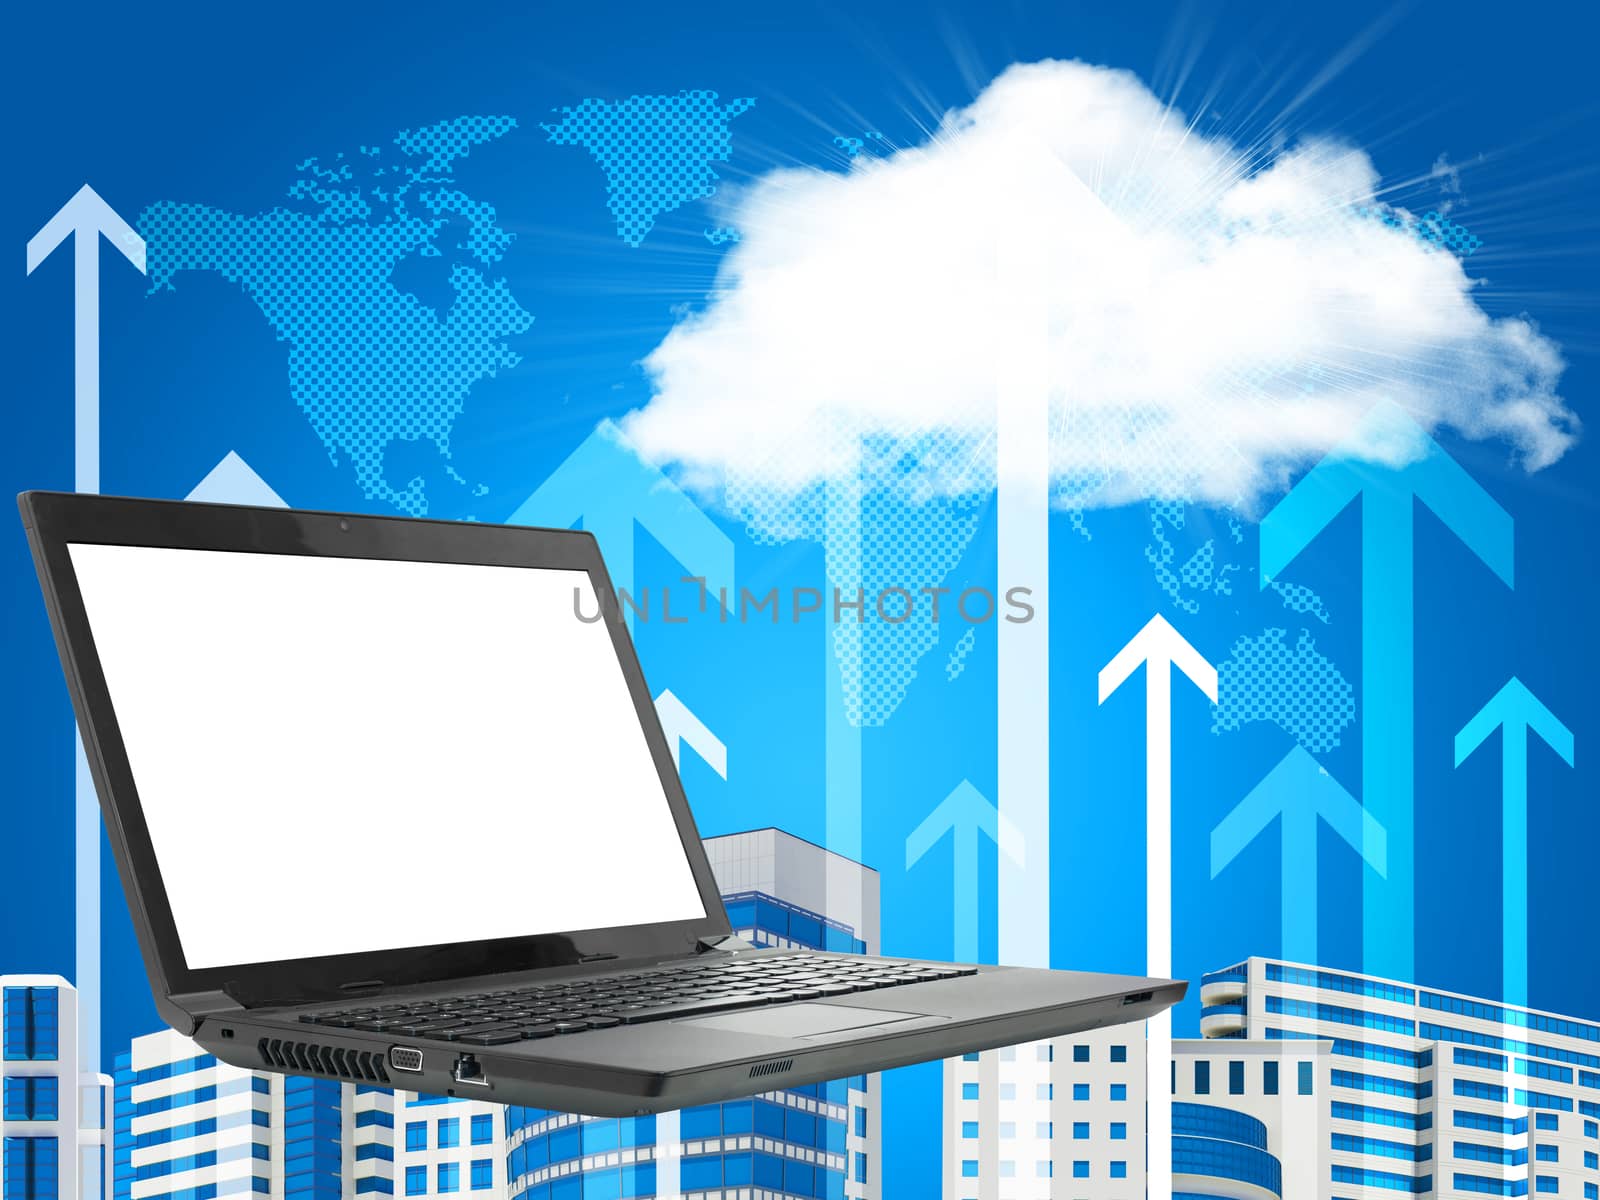 Laptop on abstract cityscape background with up arrows. Virtual world map.